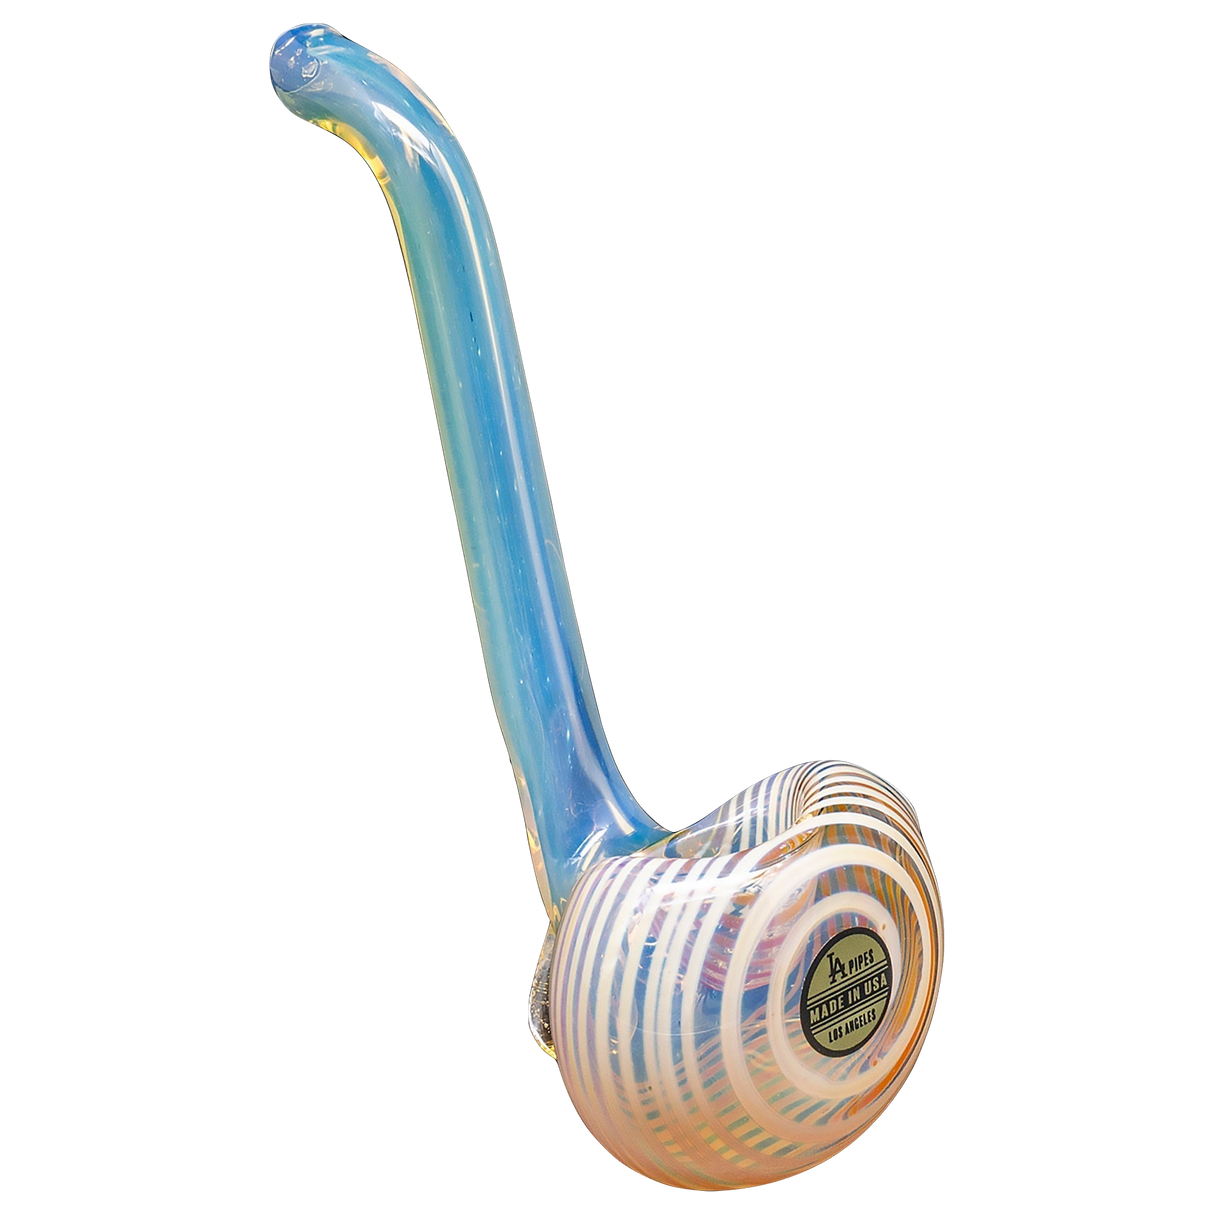 LA Pipes Spoon Hand Pipe in Borosilicate Glass with Colorful Striped Design - Side View